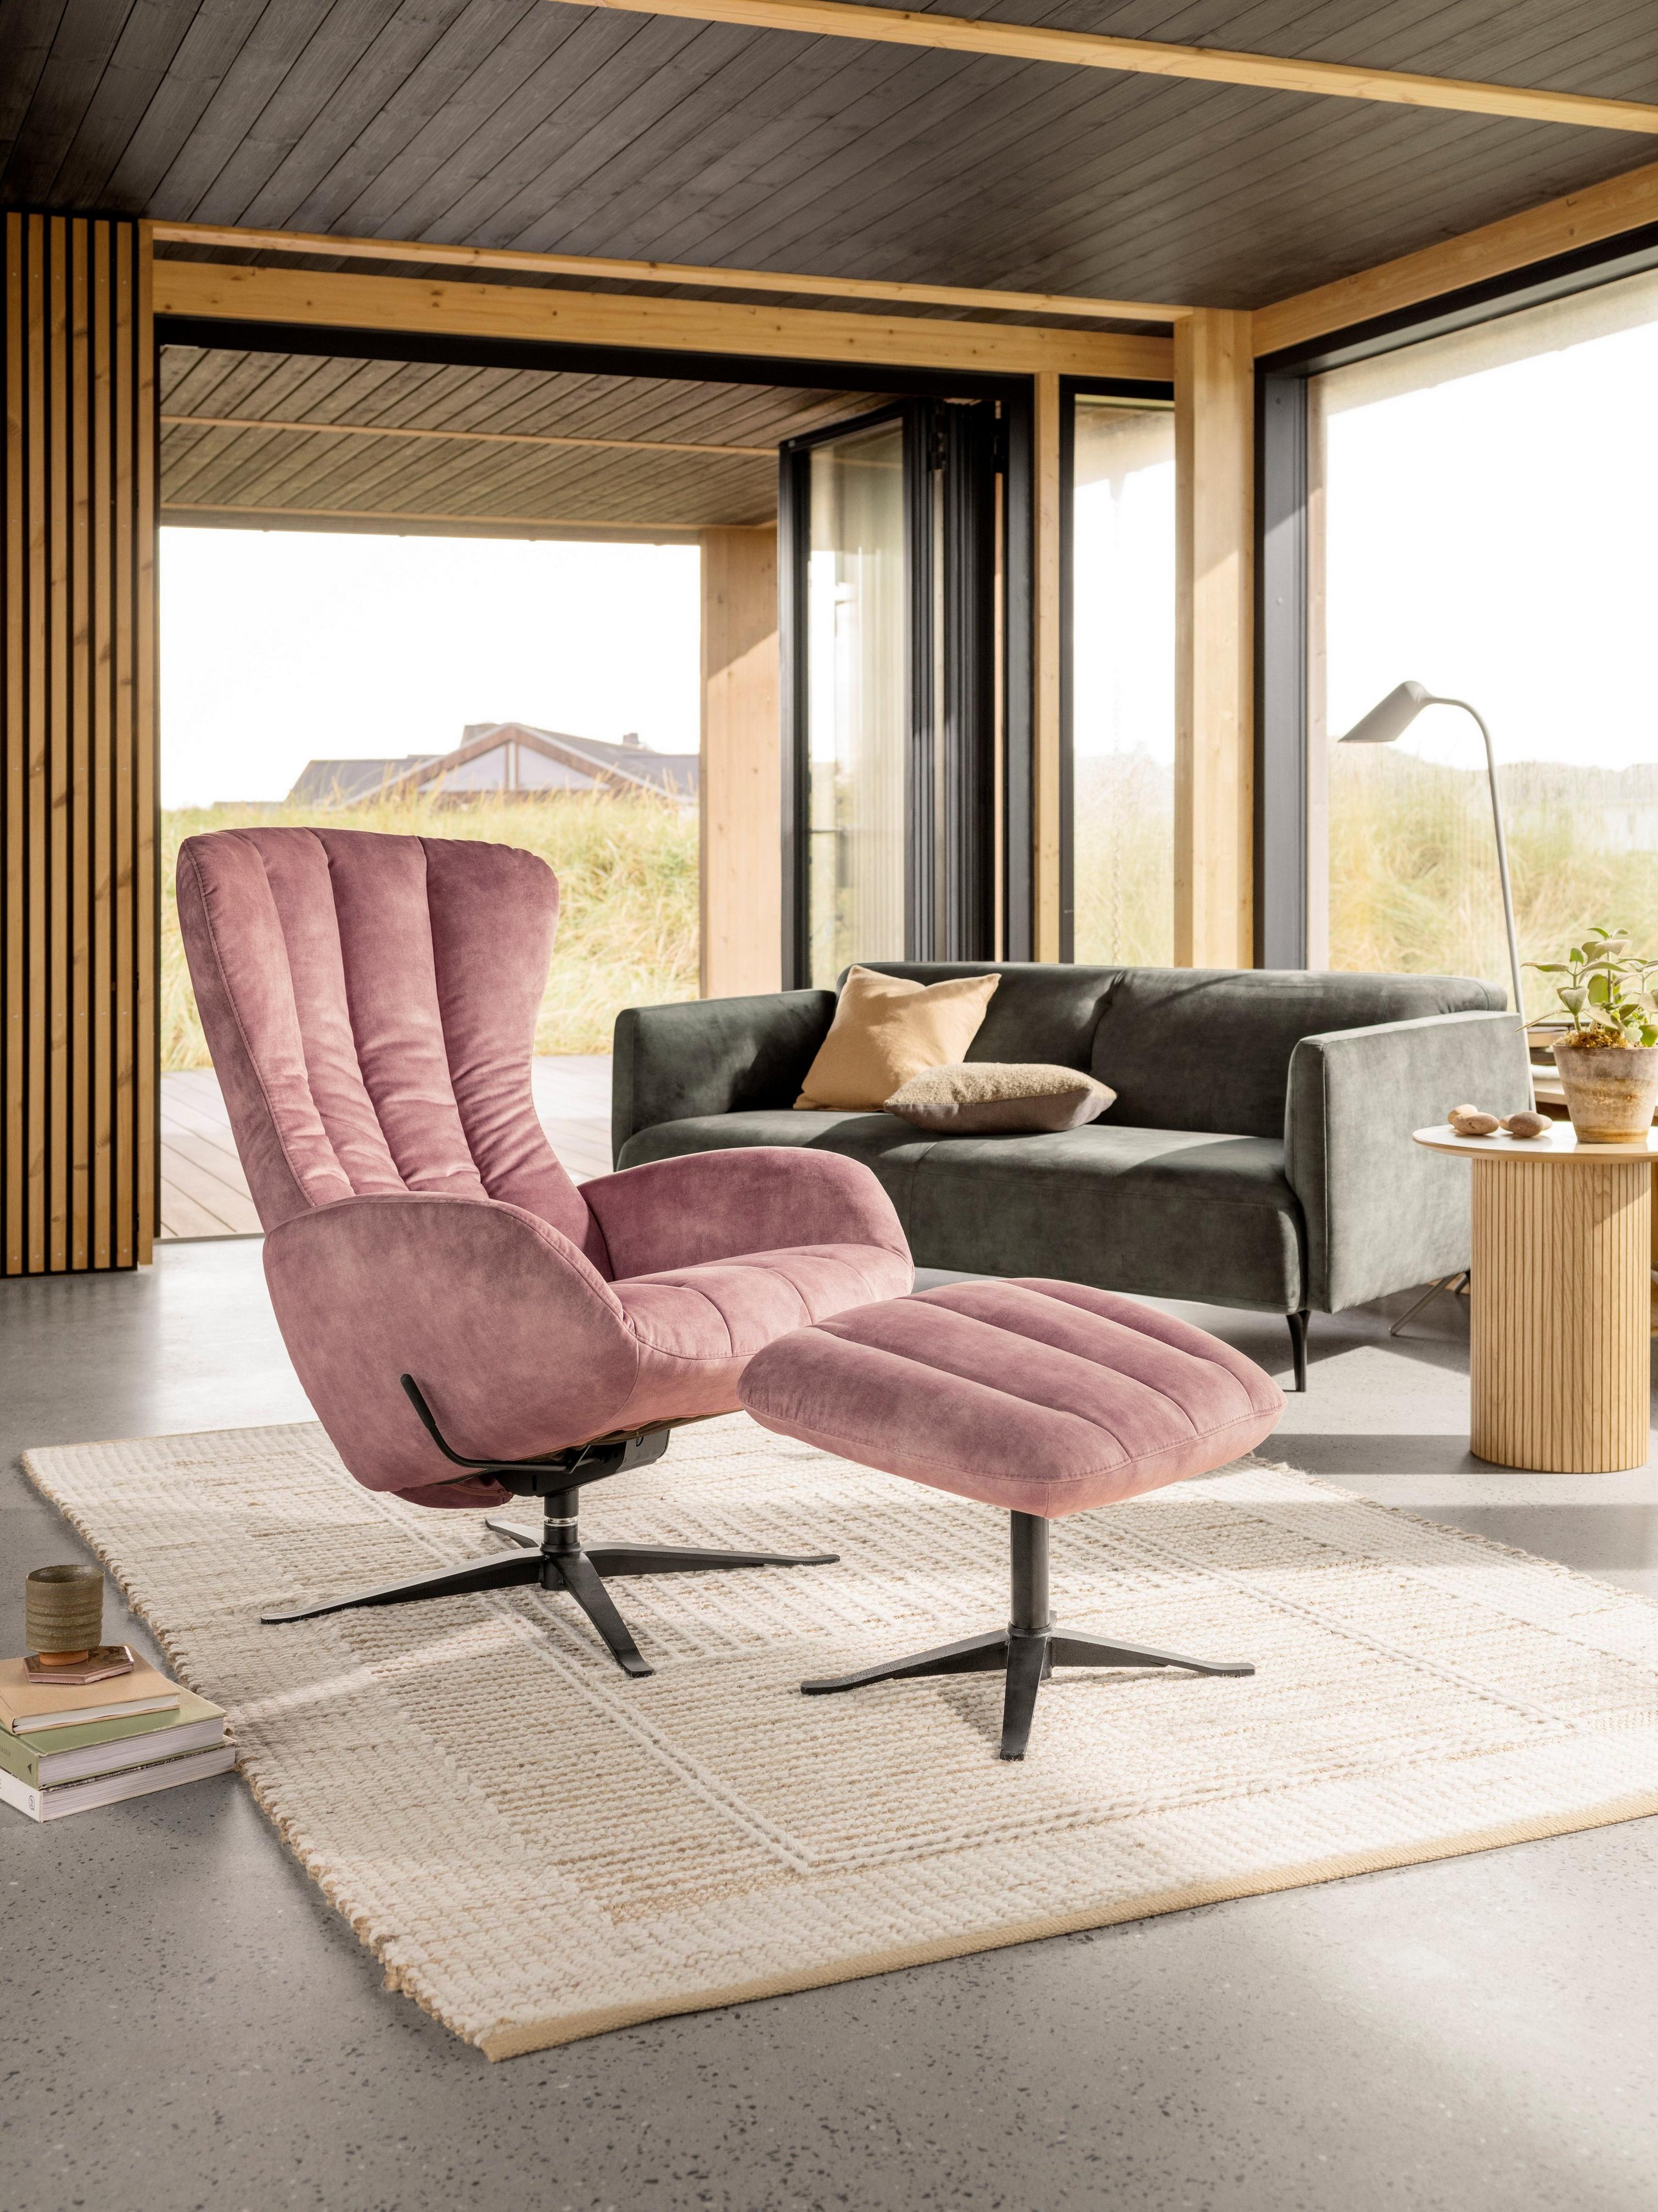 Light-filled living space featuring the Tilburg living chair and matching foot stool in dusty rose Ravello fabric.